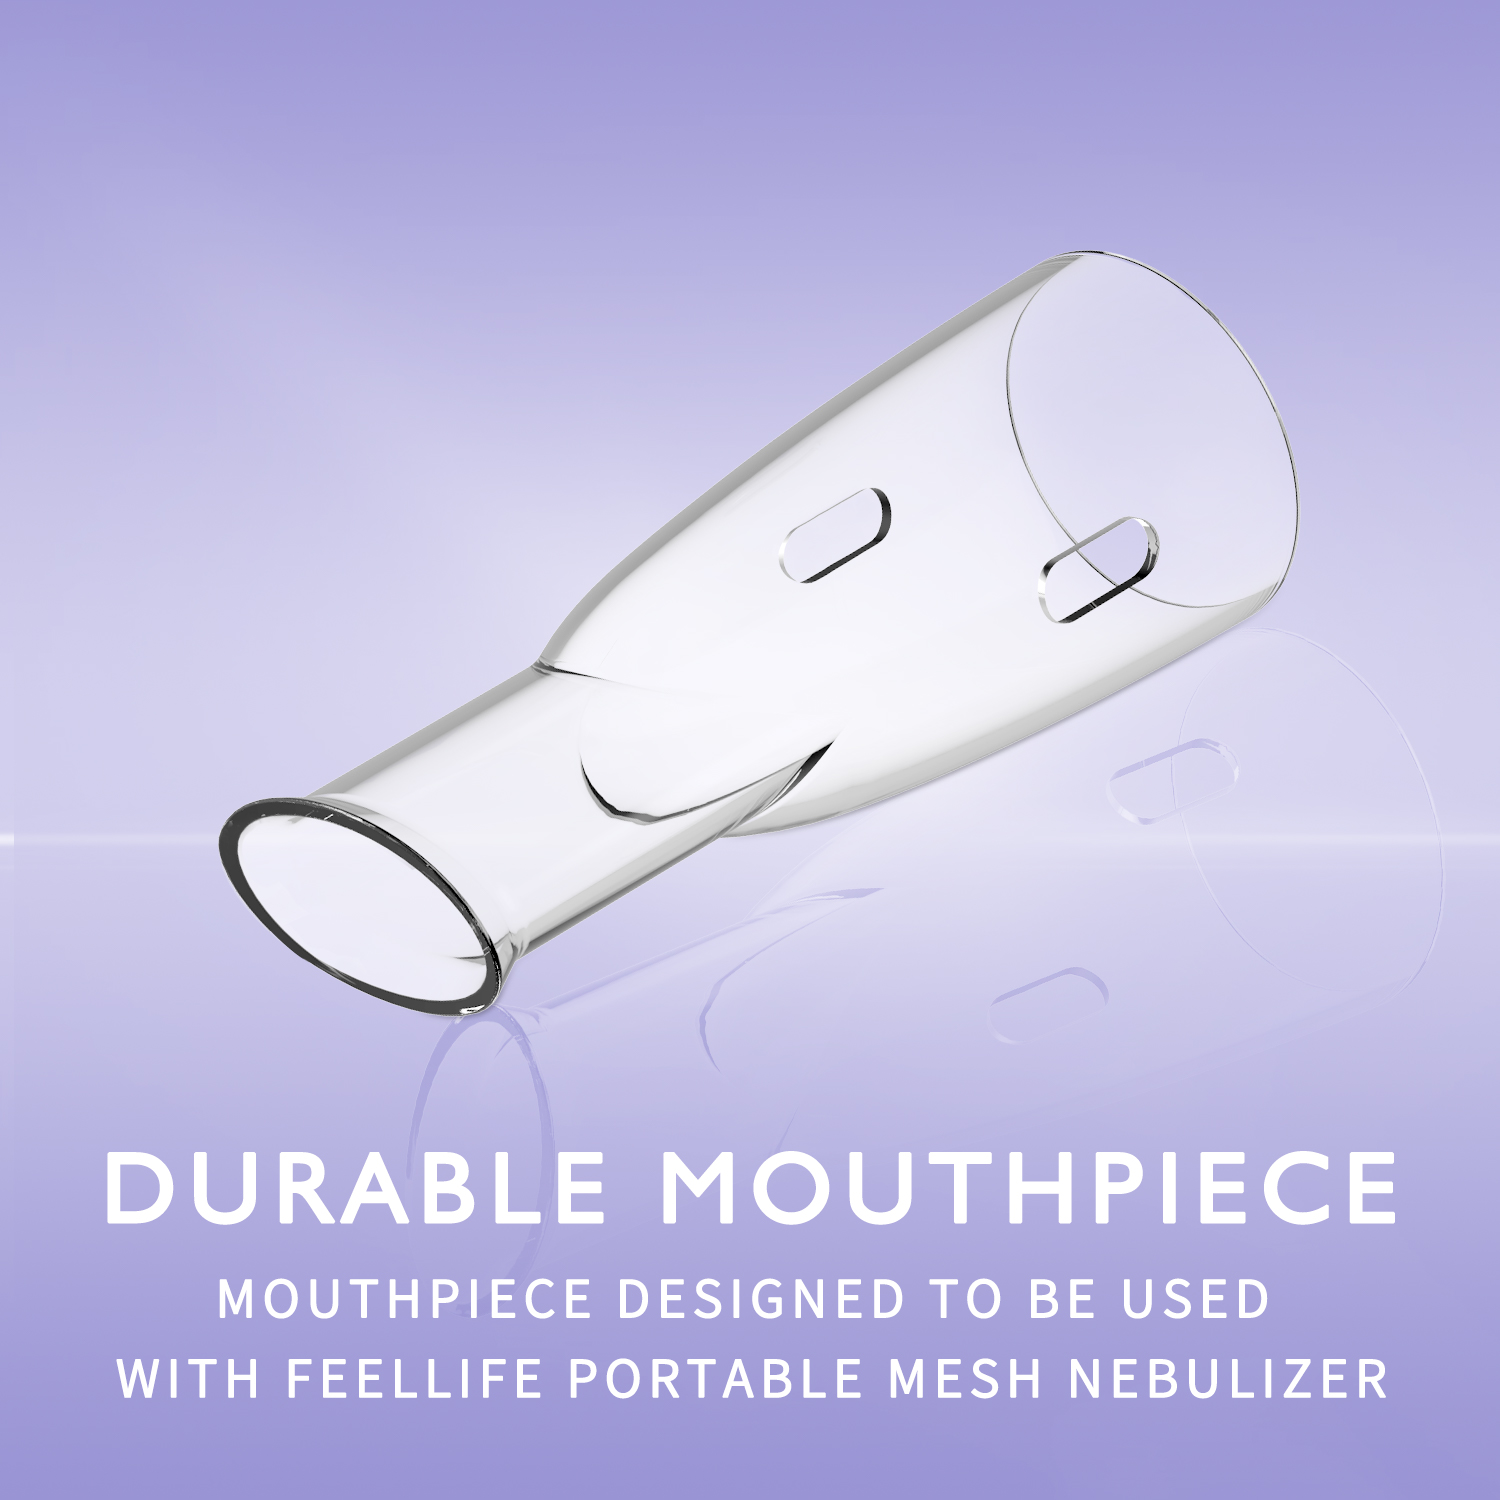 Mouthpiece For Portable Mesh Nebulizer